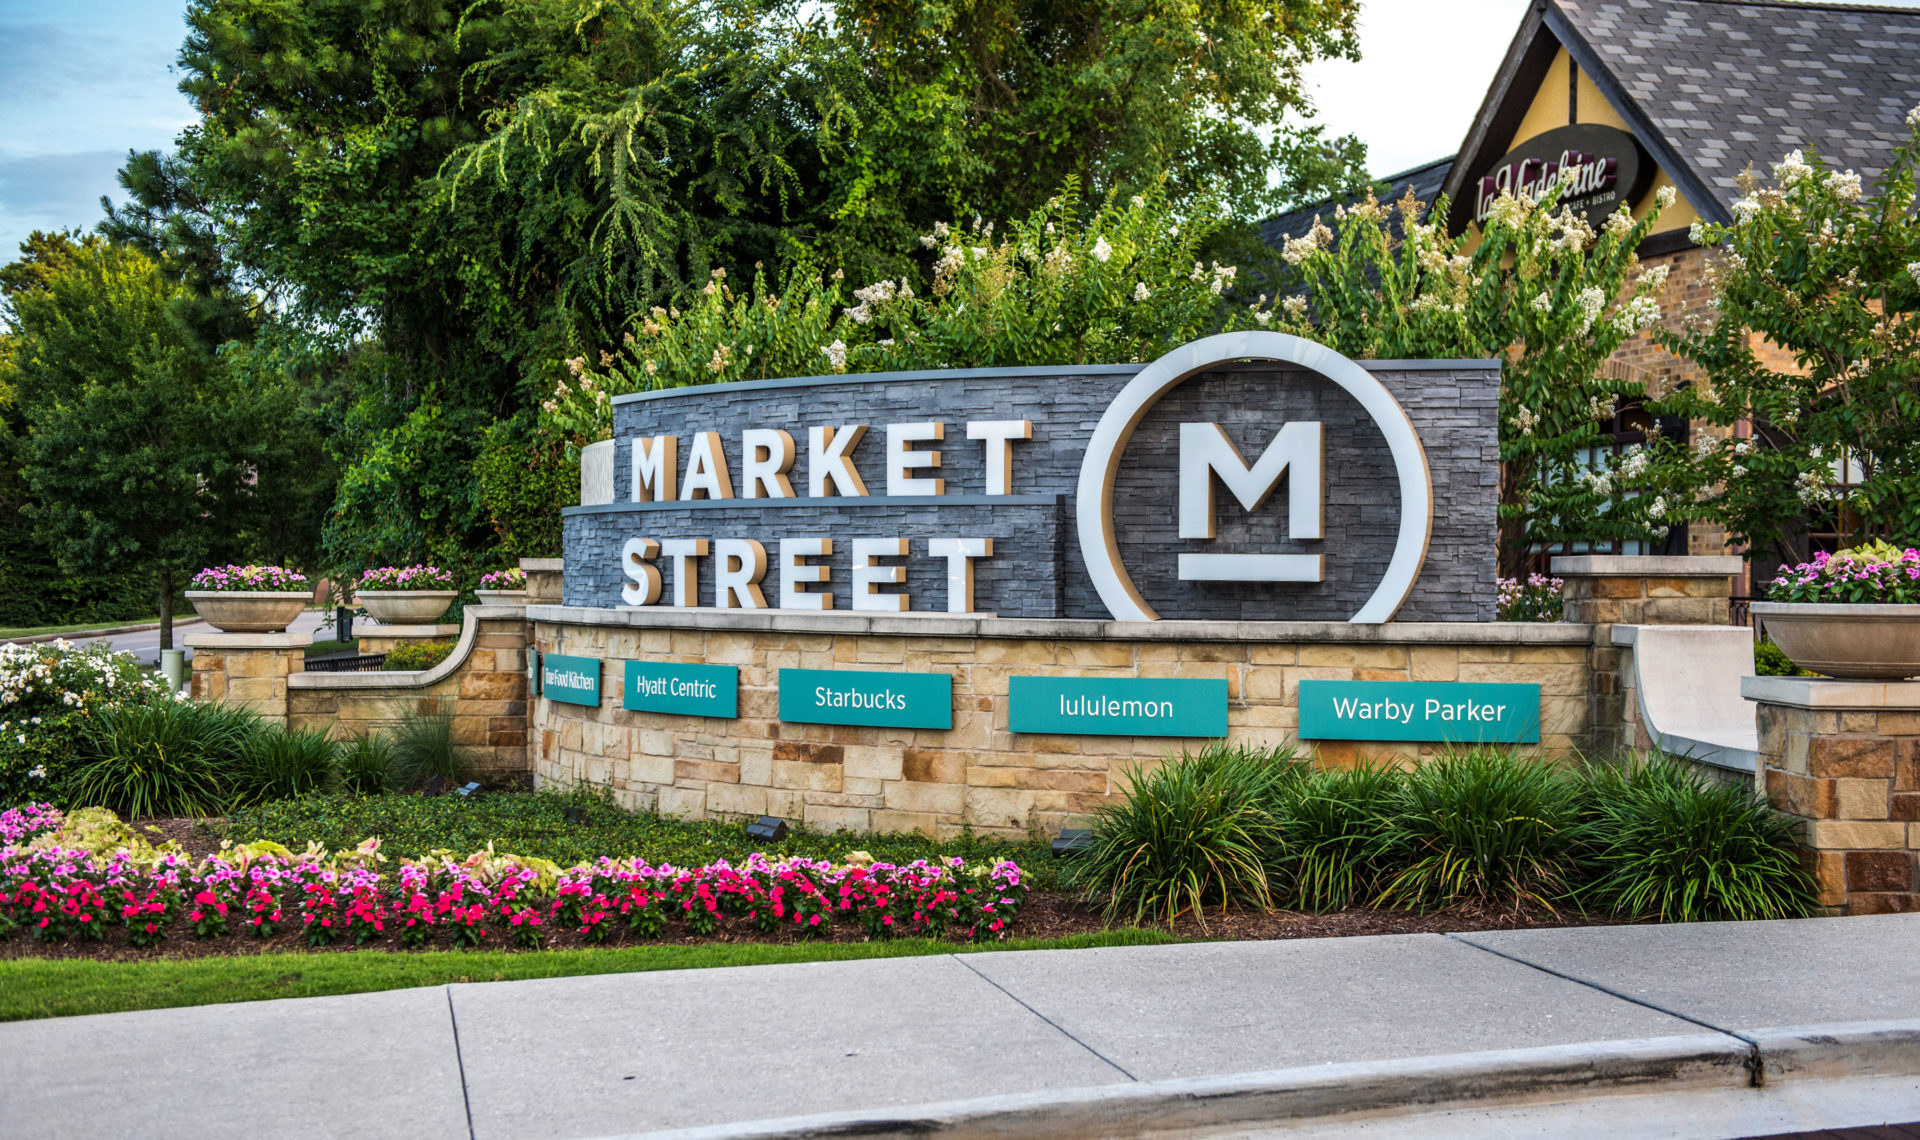 Market Street adds retail, dining options in The Woodlands